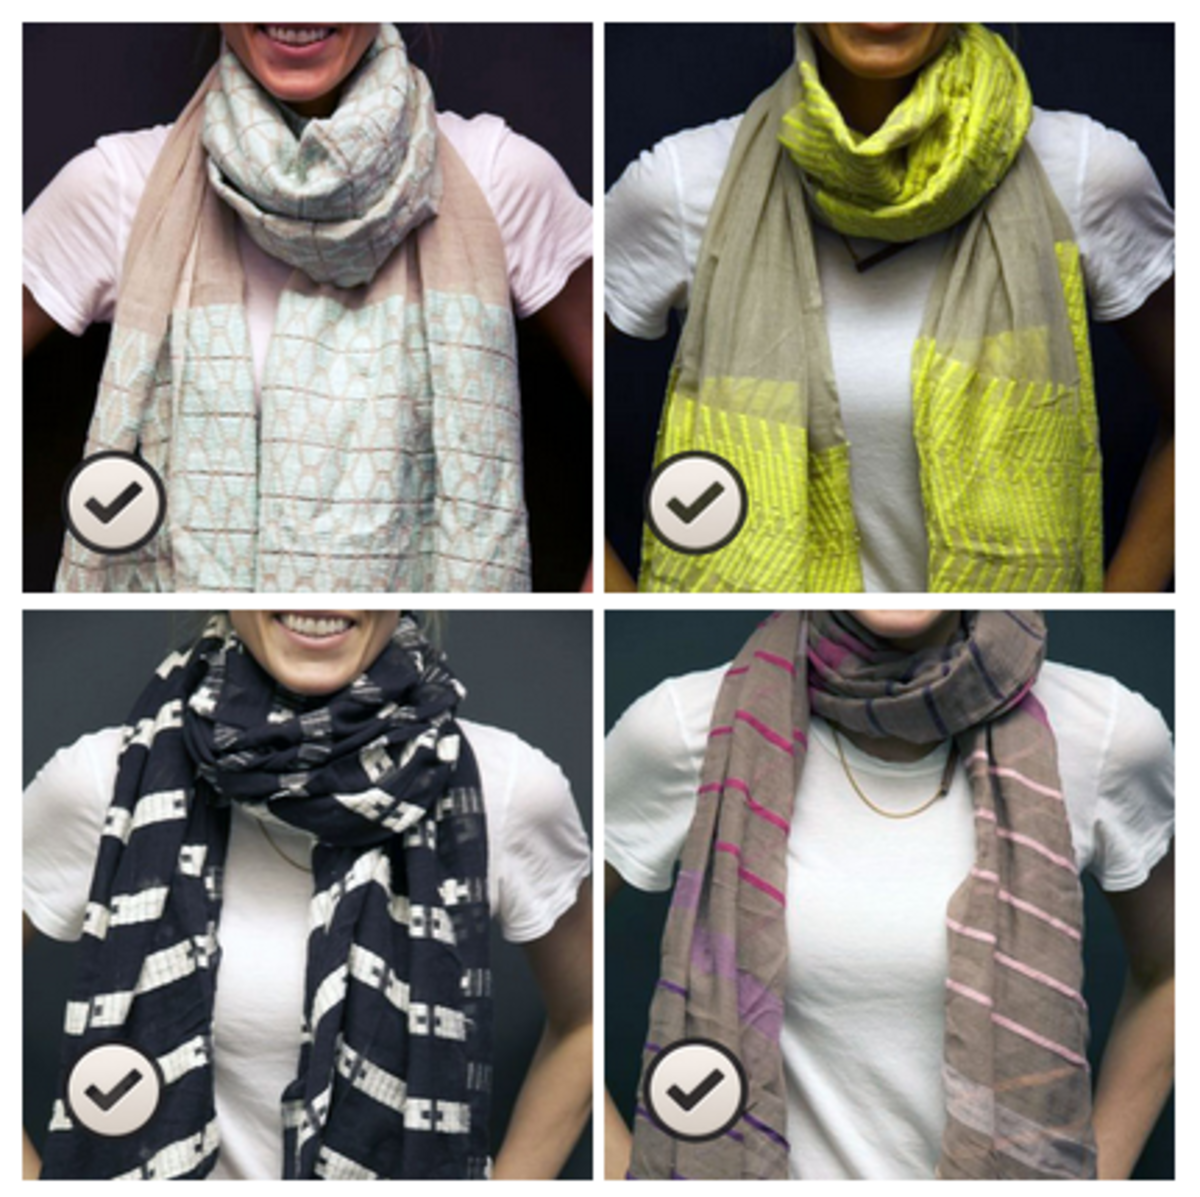 AltSummit and ONE FashionABLE Scarf Design - MomTrends